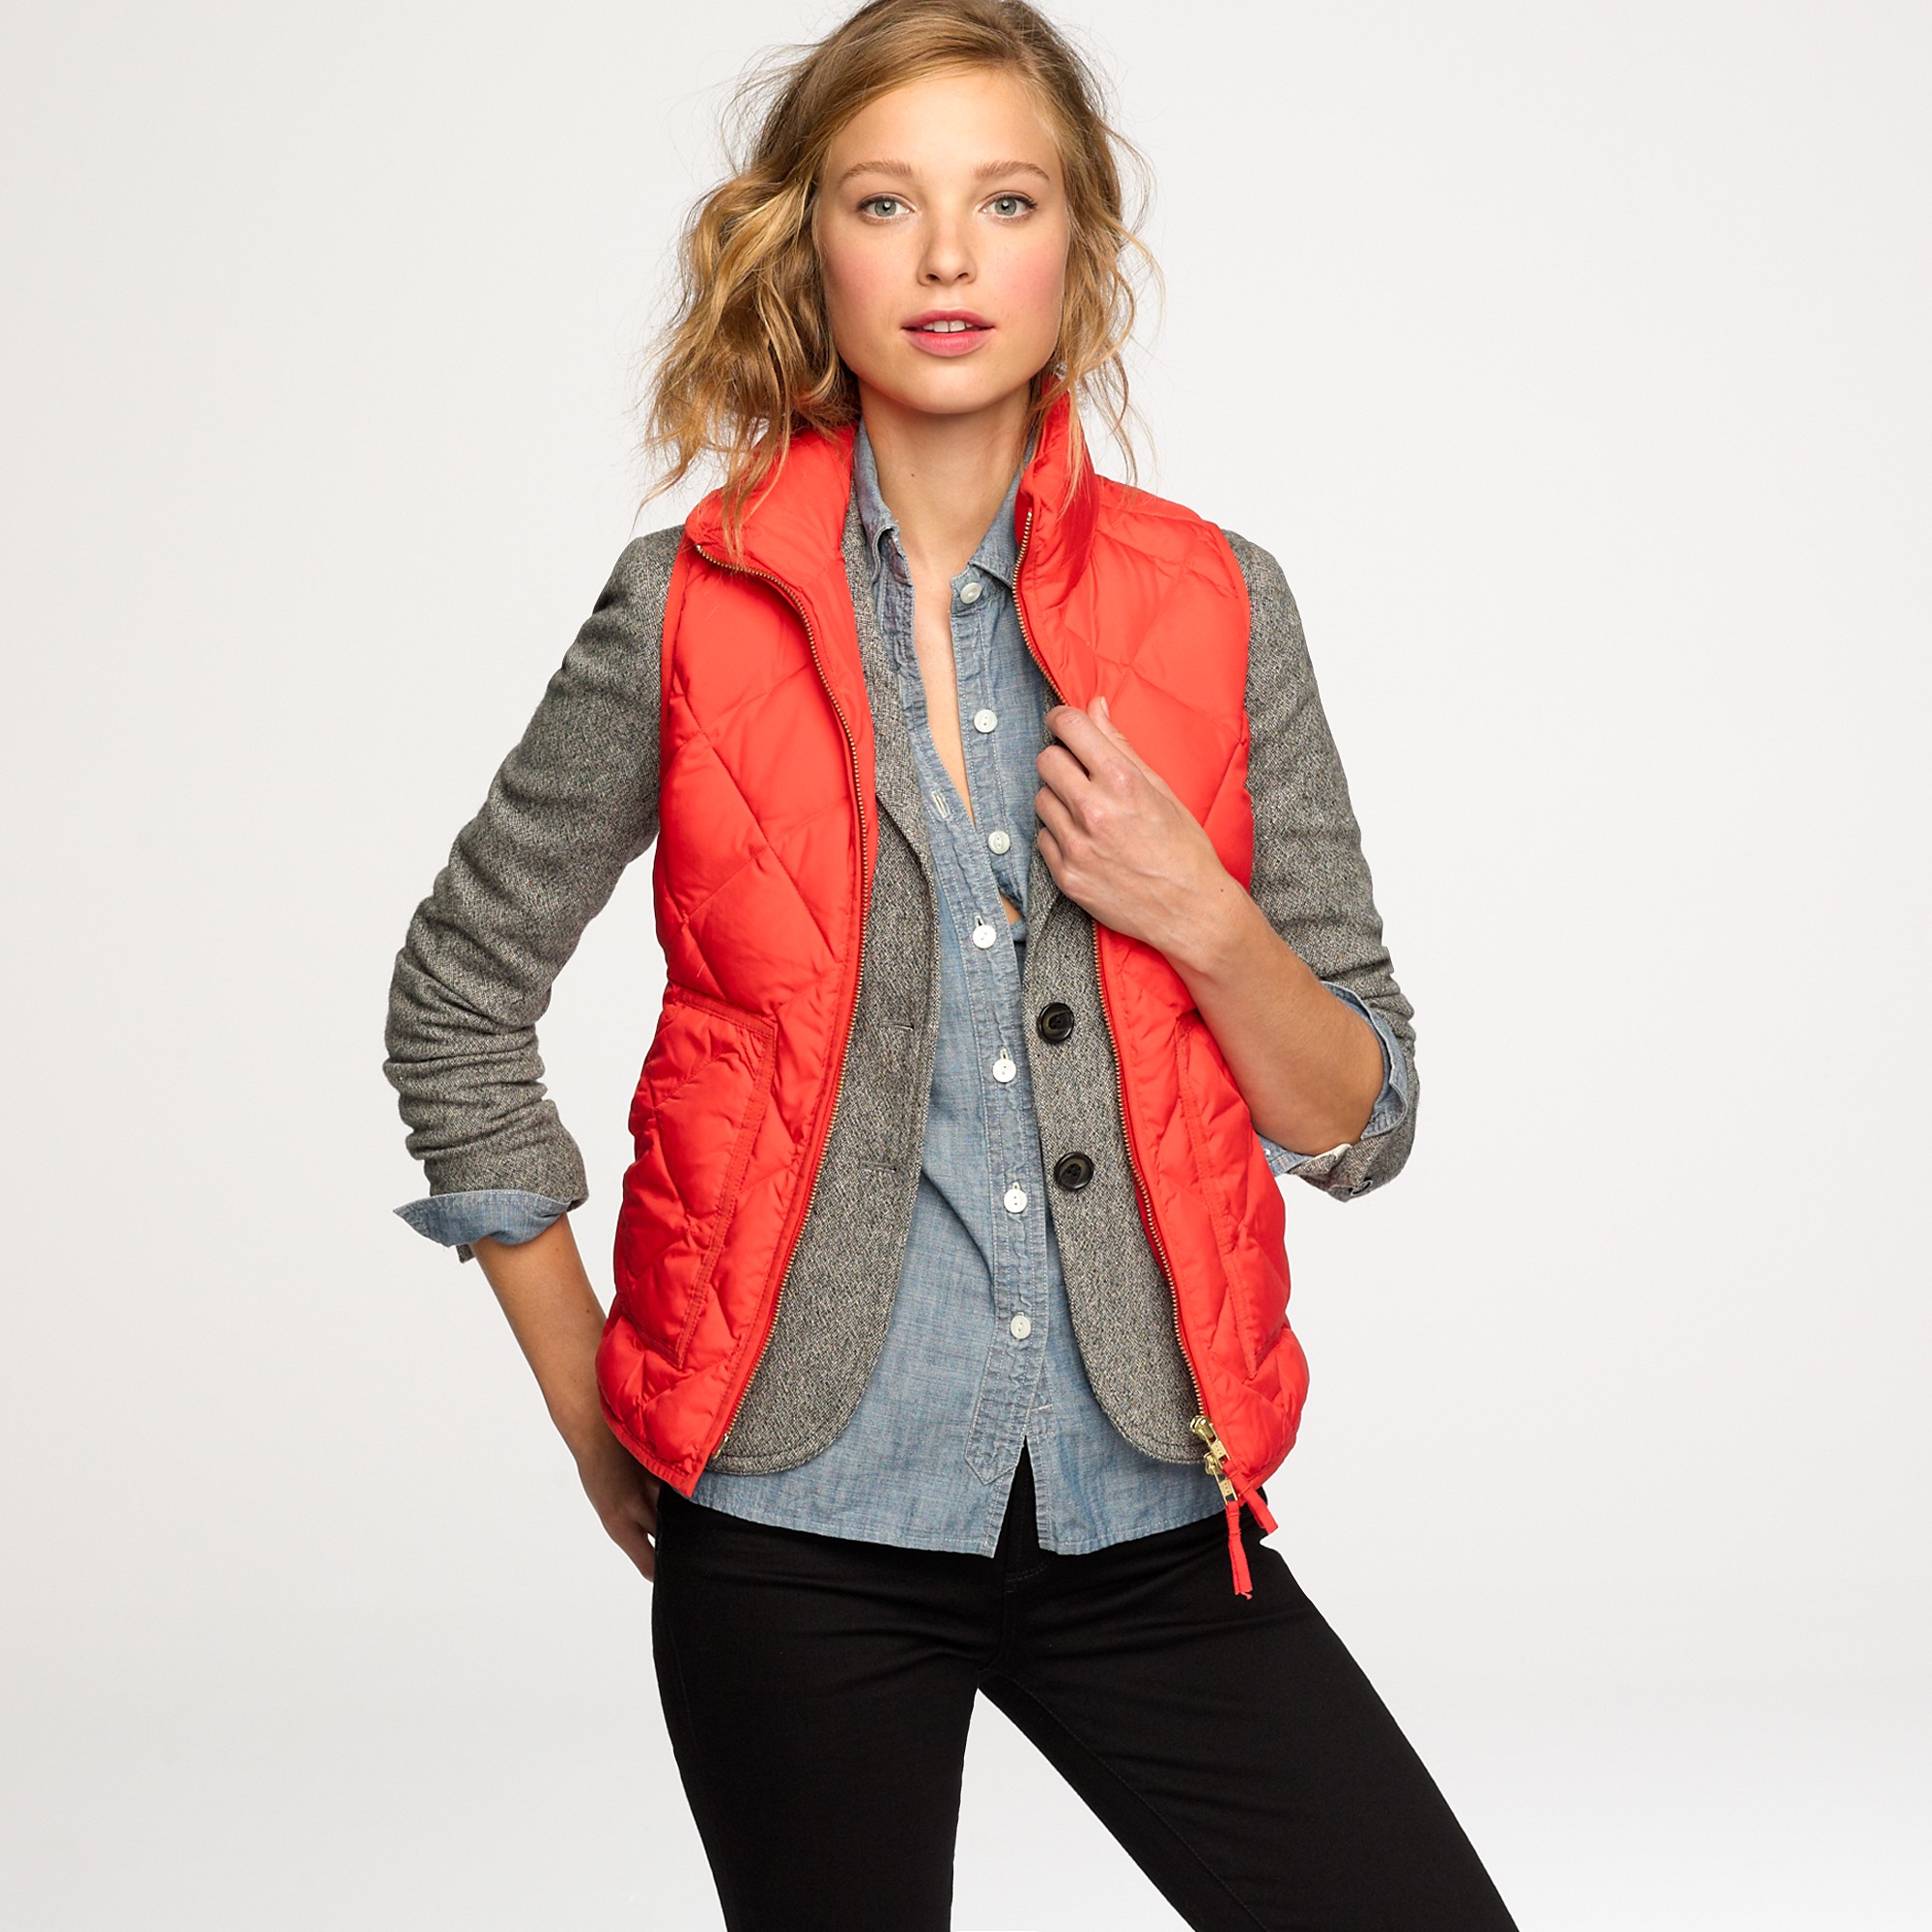 J.Crew Excursion Quilted Vest in Red - Lyst